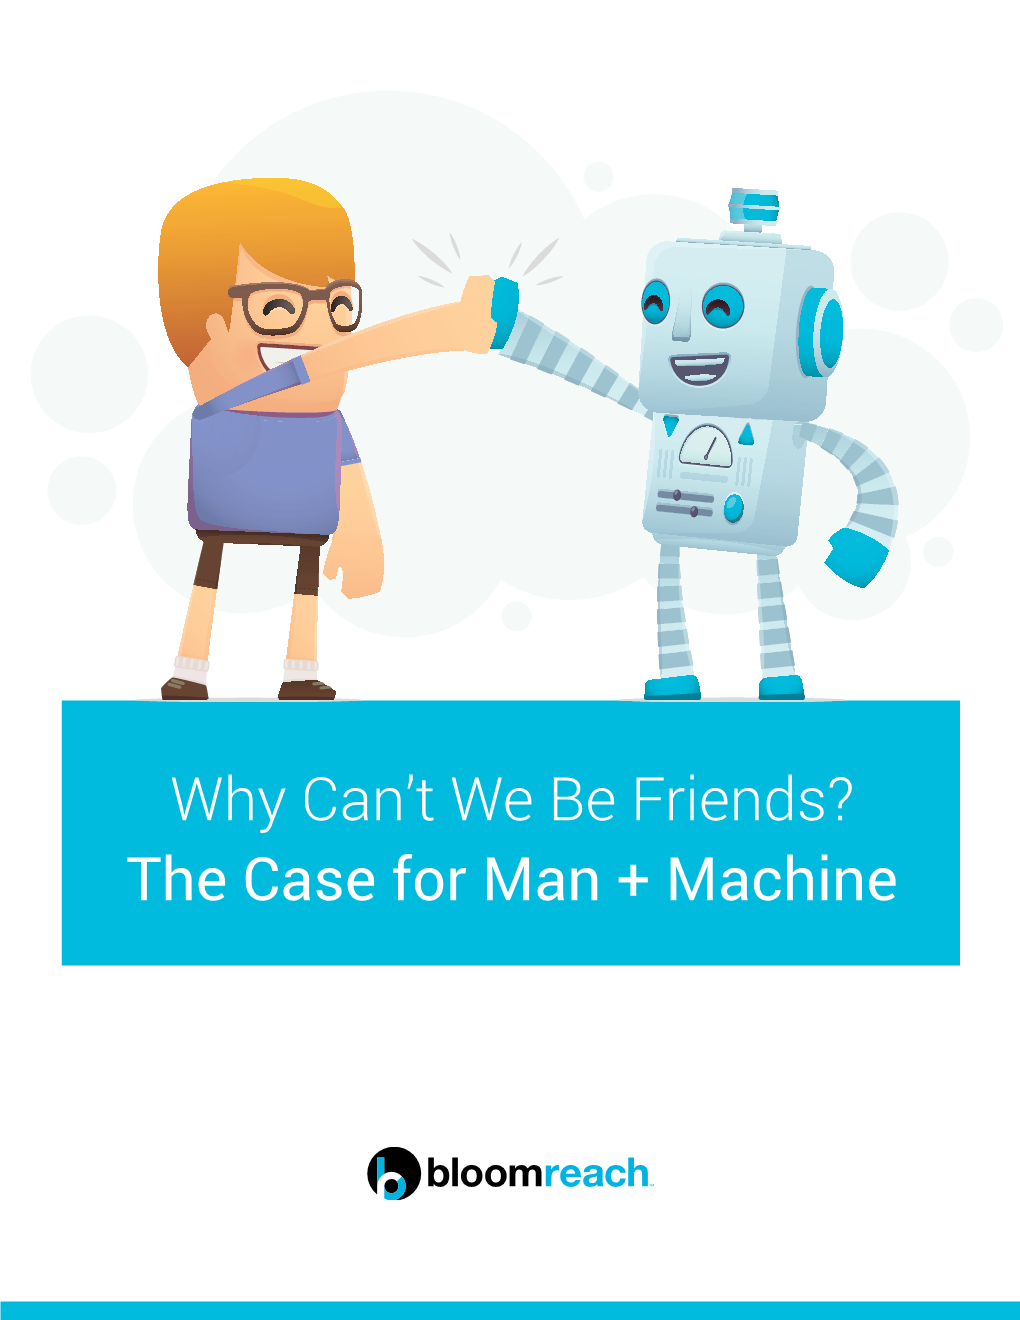 The Case for Man + Machine Why Can’T We Be Friends? the Case for Man + Machine